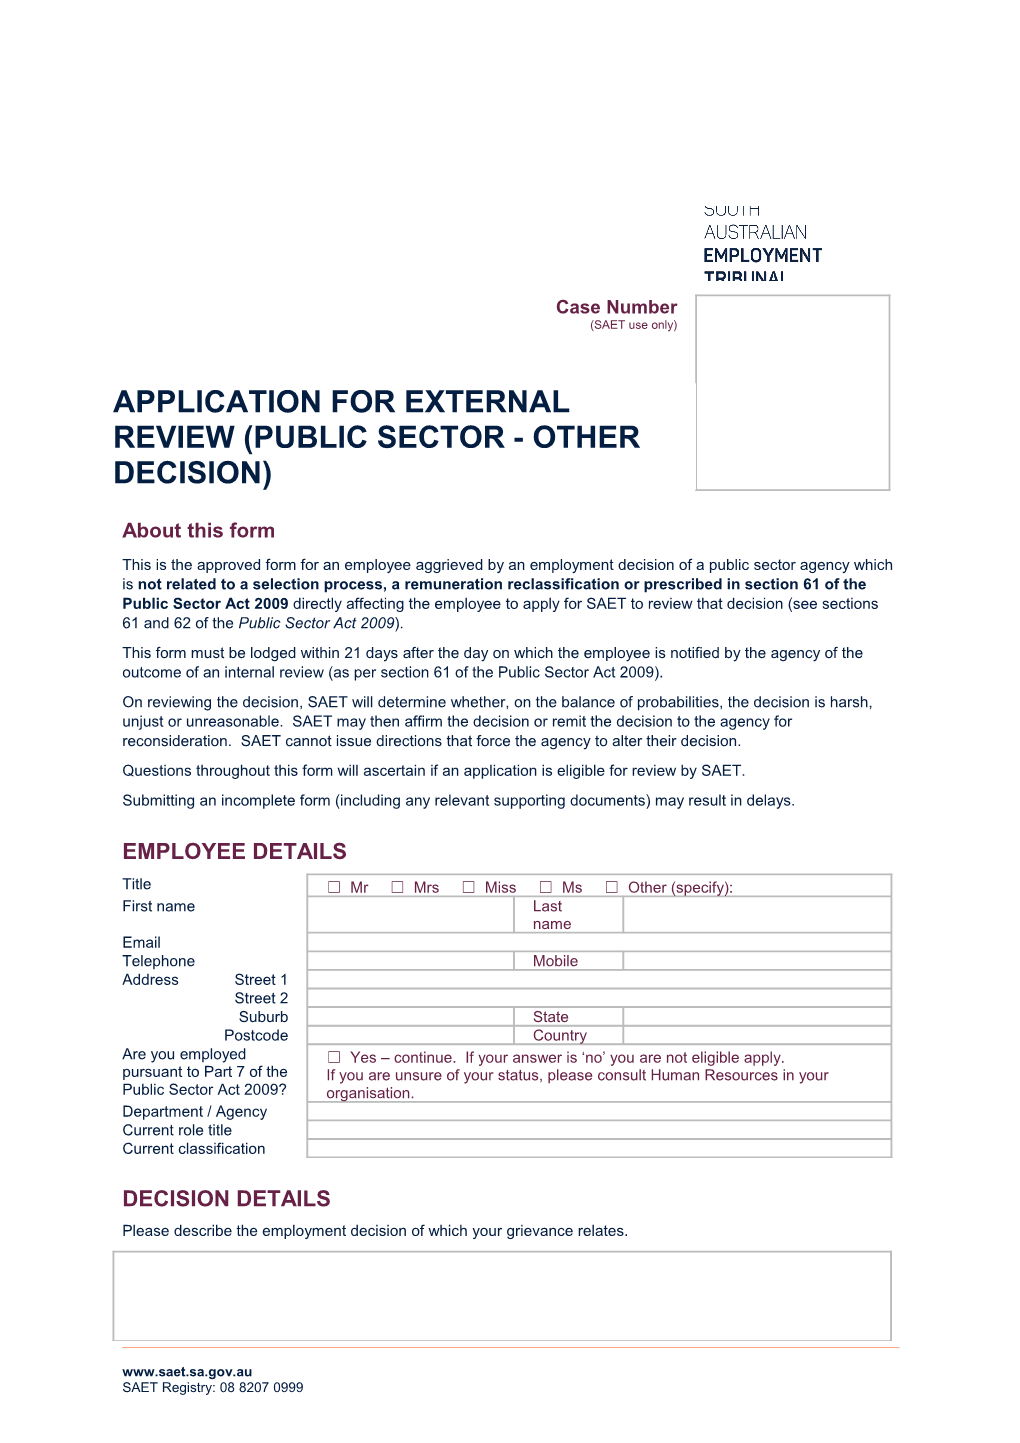 Application for External Review (Public Sector - Other Decision)